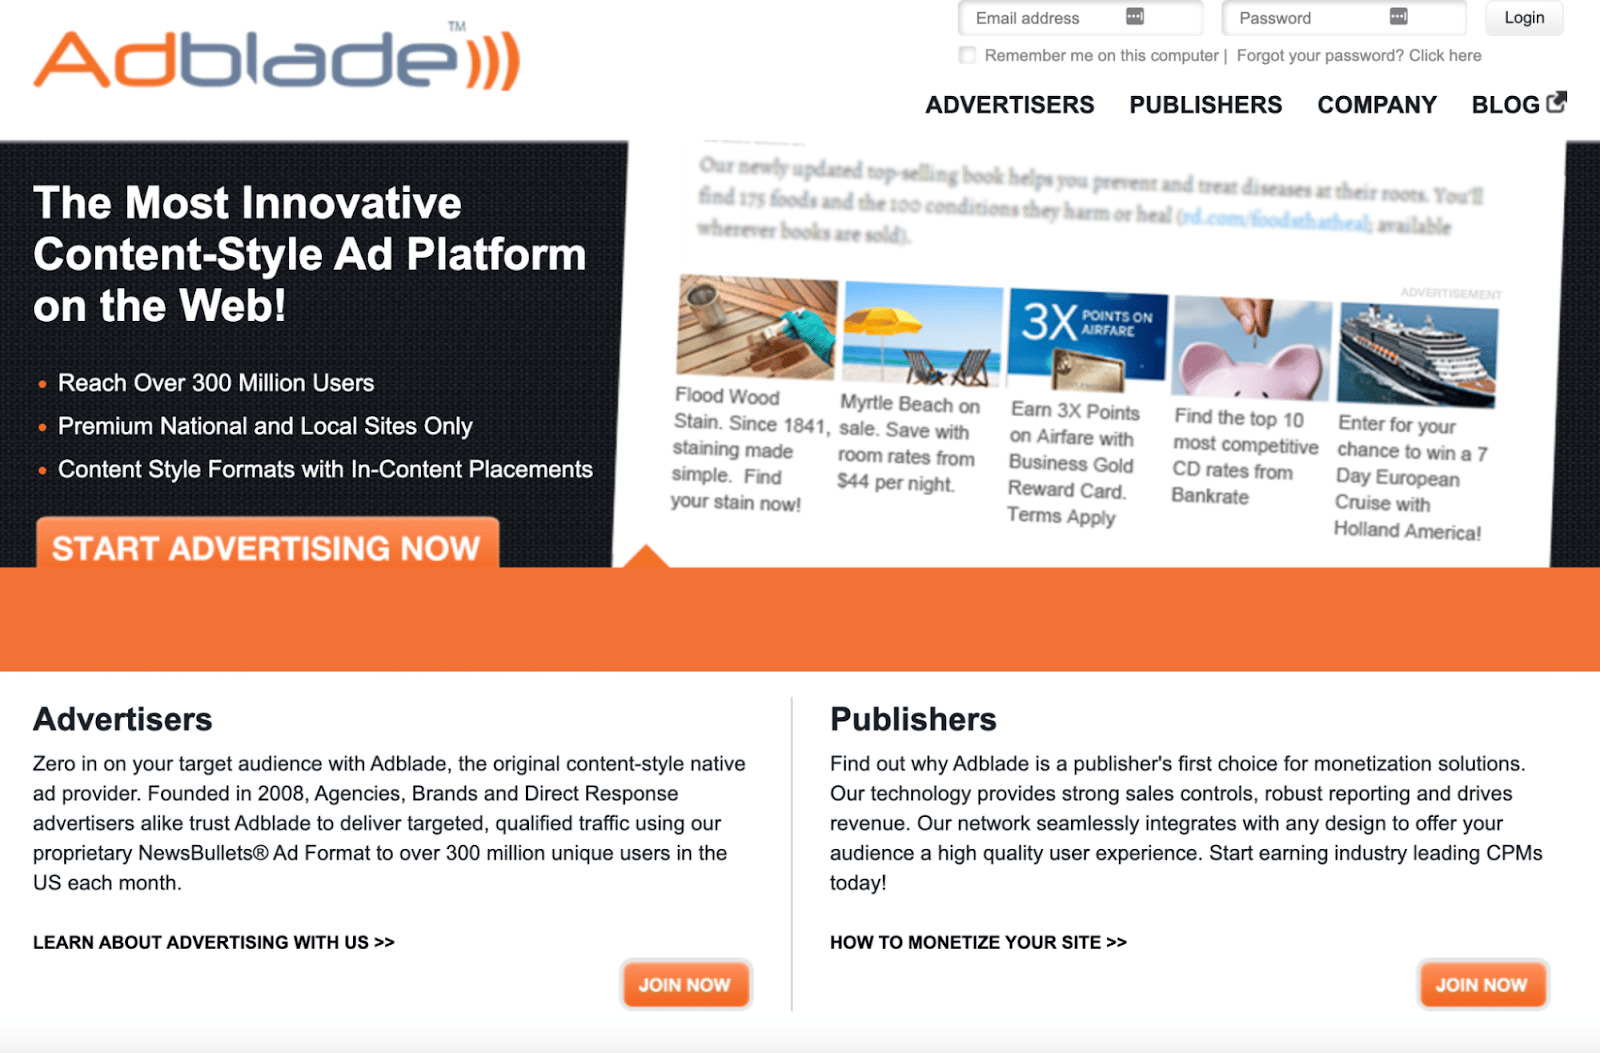 The homepage for Adblade